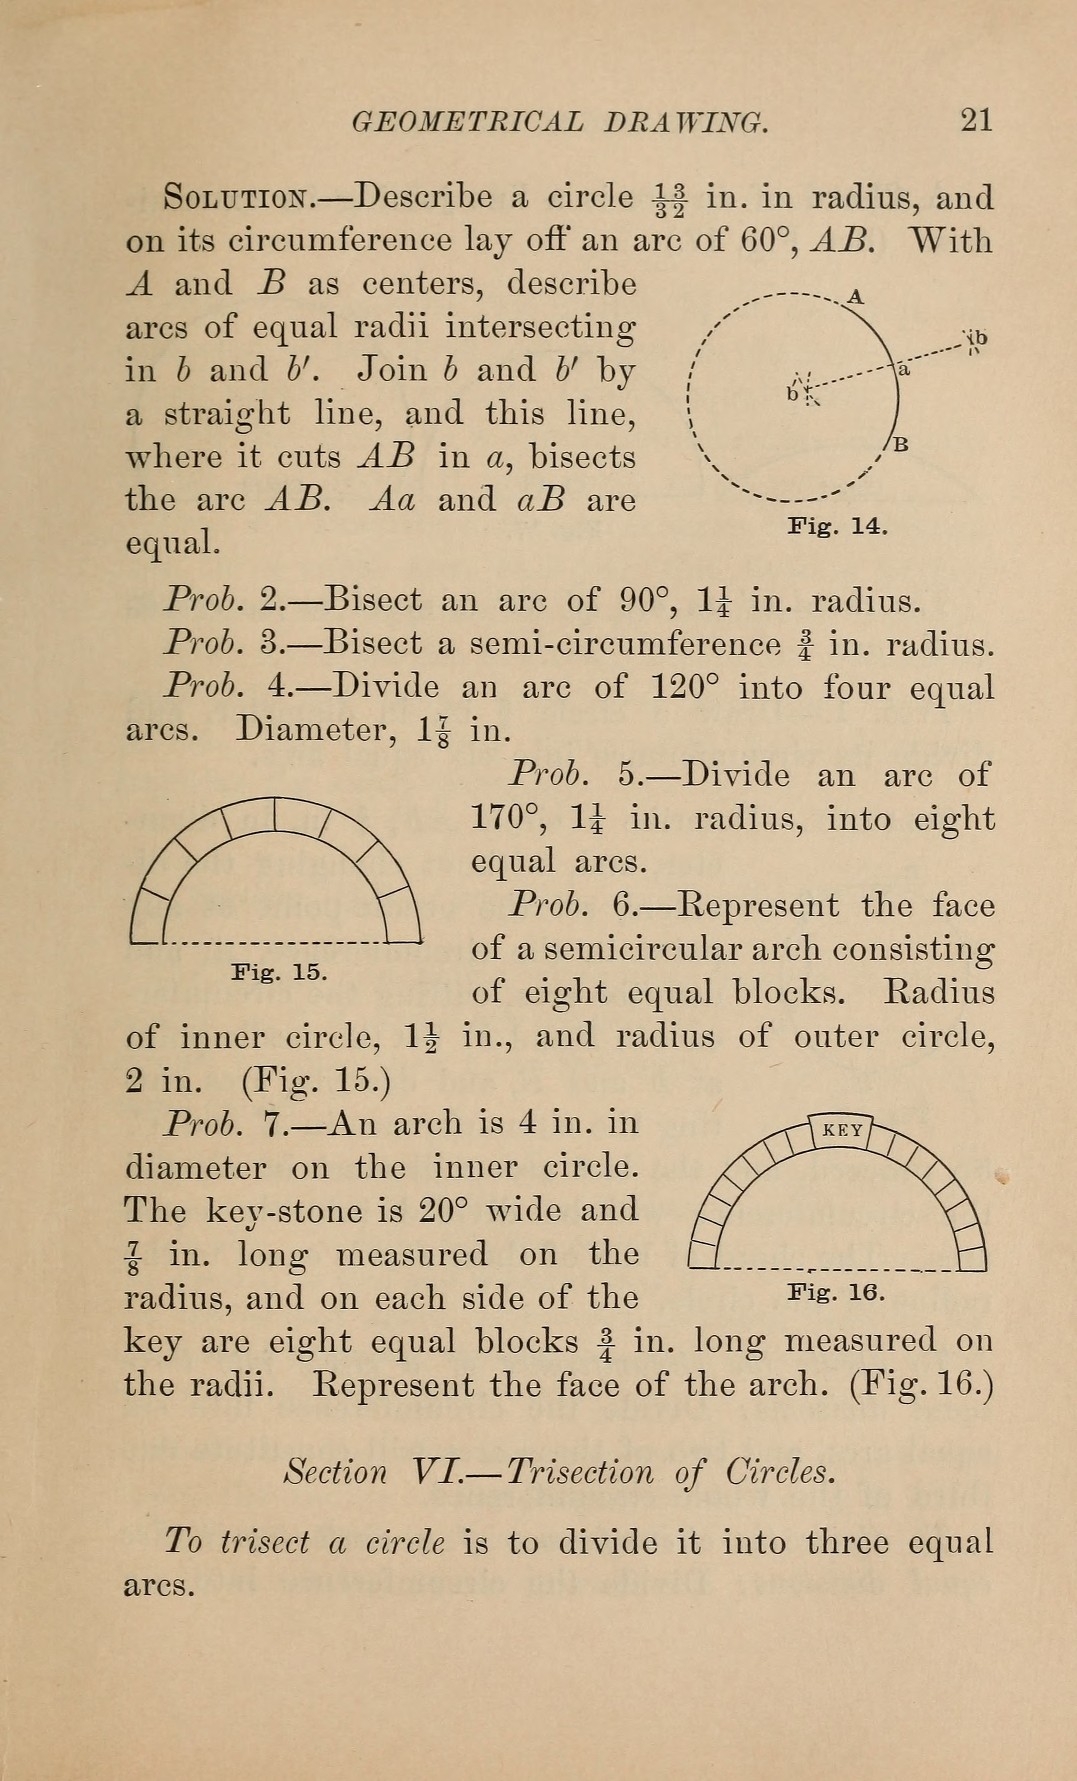 [Frank Aborn] Elementary mechanical drawing, for school and shop [English] 25